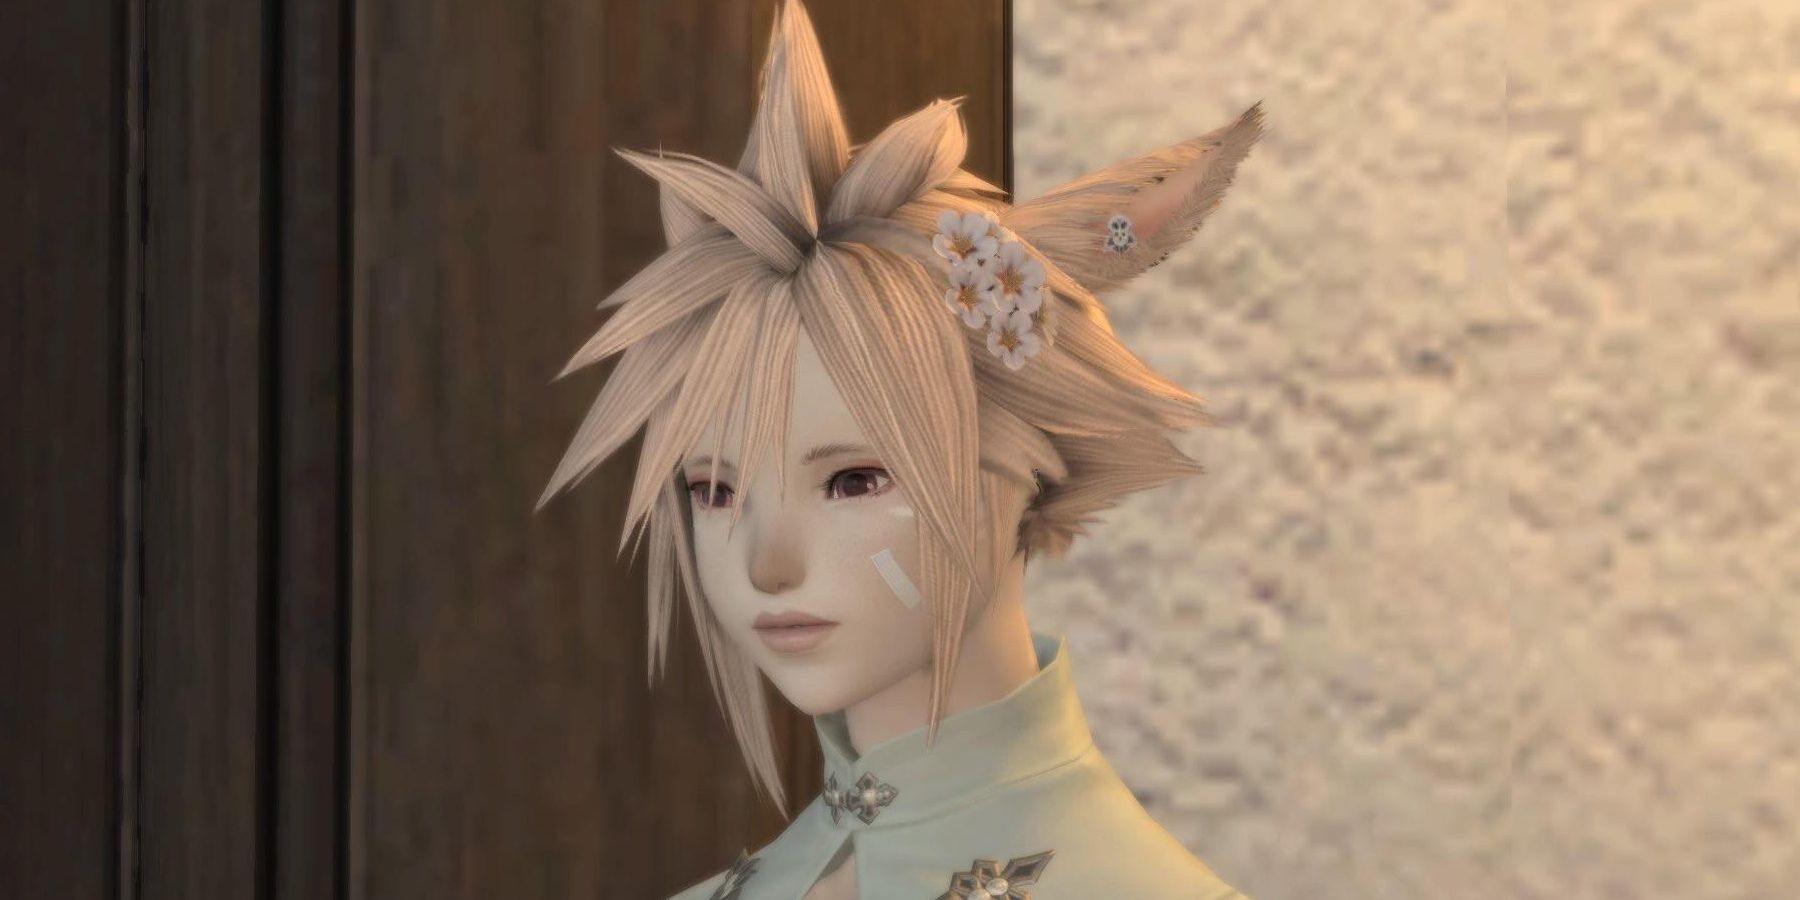 FFXIV Sharlayan Rebellion hair unlock - How to get Alisaie's hairstyle